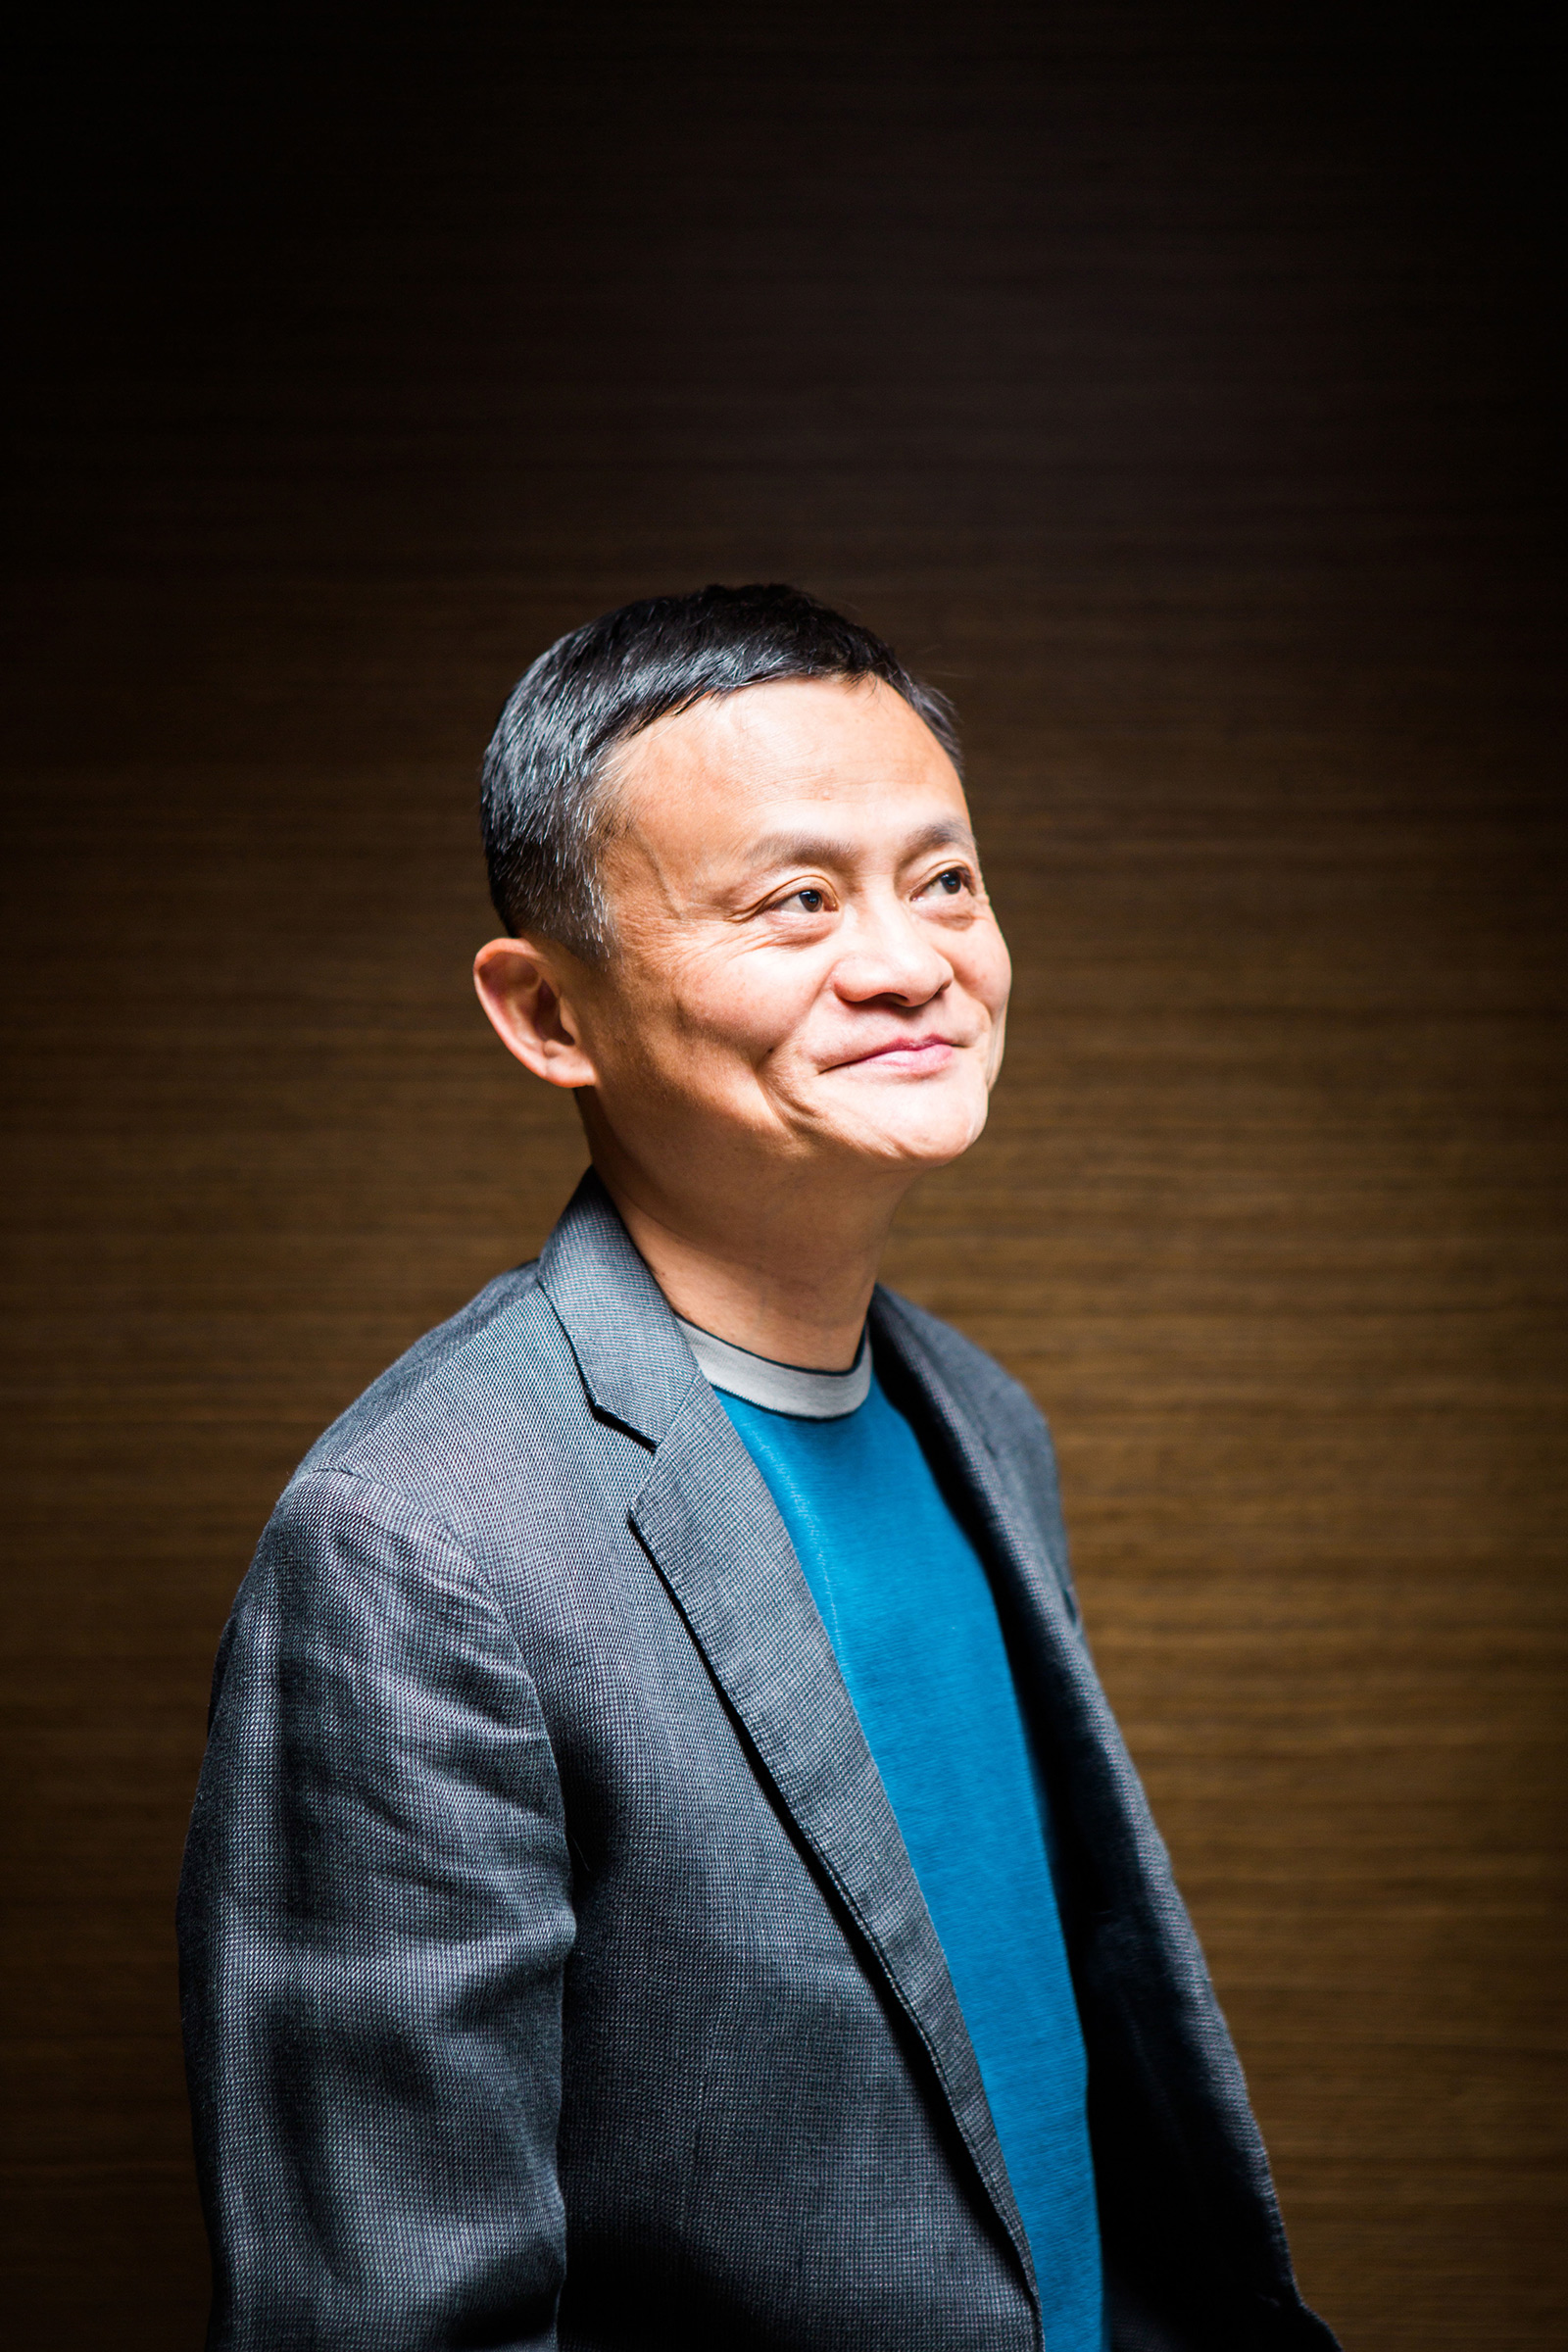 Jack Ma, founder of Alibaba Group, at the company's headquarters in Hangzhou, China, in March 2017. (Tony Law—Redux)